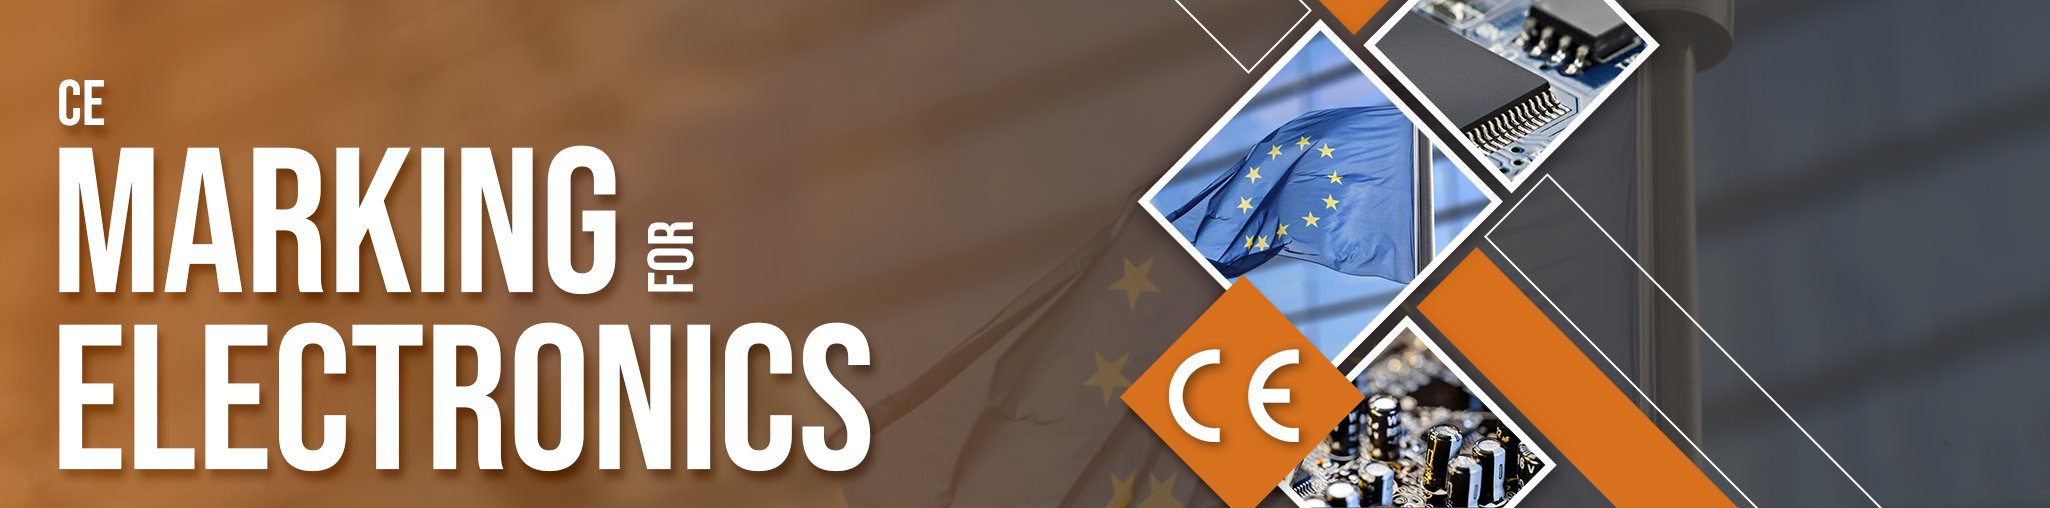 CE Marking for Electronics